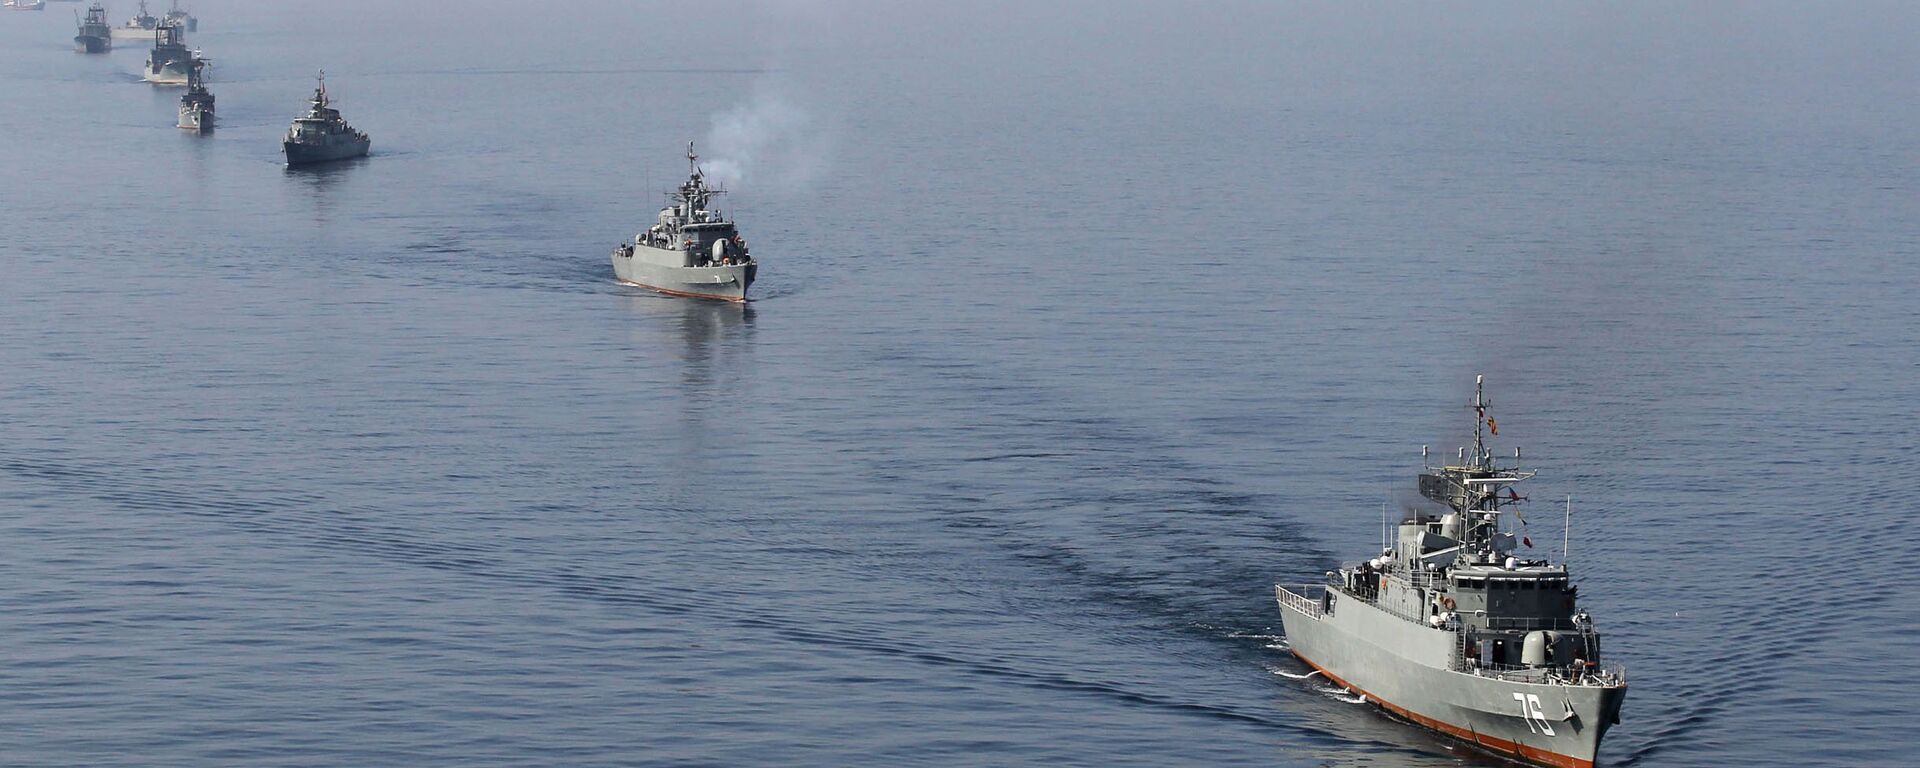 Iranian Navy boats take part in maneuvers during the Velayat-90 navy exercises in the Strait of Hormuz in southern Iran (File) - Sputnik International, 1920, 03.11.2021